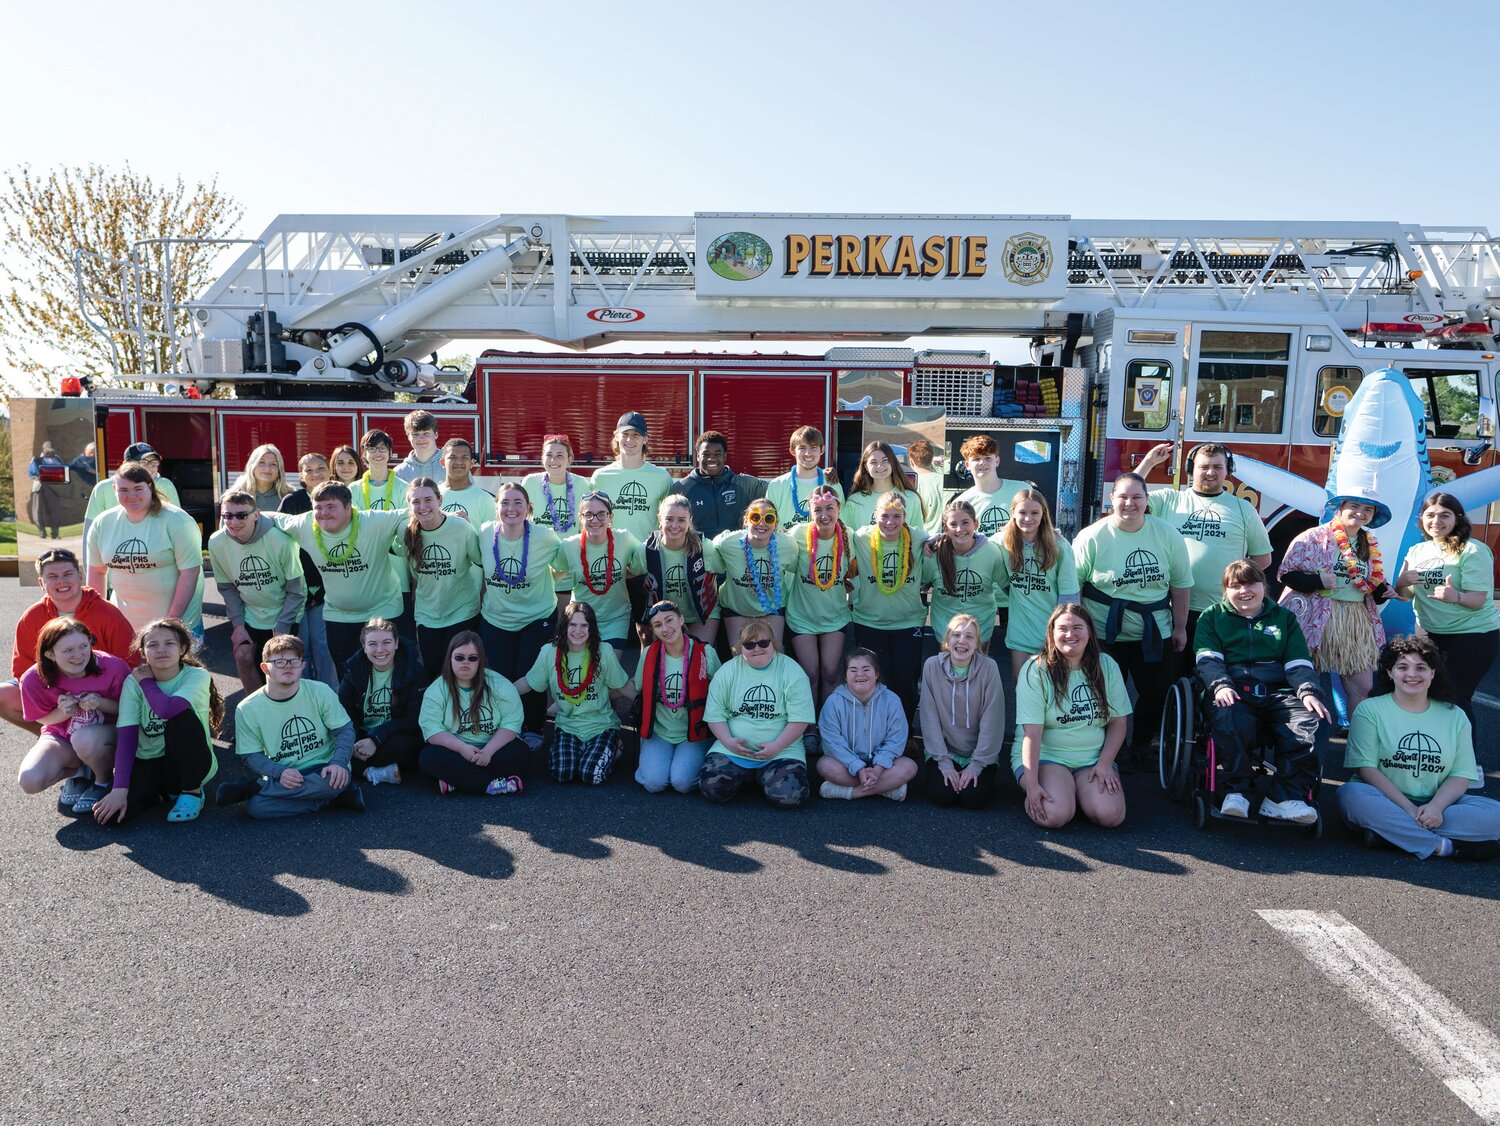 Local fire companies, including Perkasie, assisted at  April Showers, an event organized by the Unified Pennridge Club.